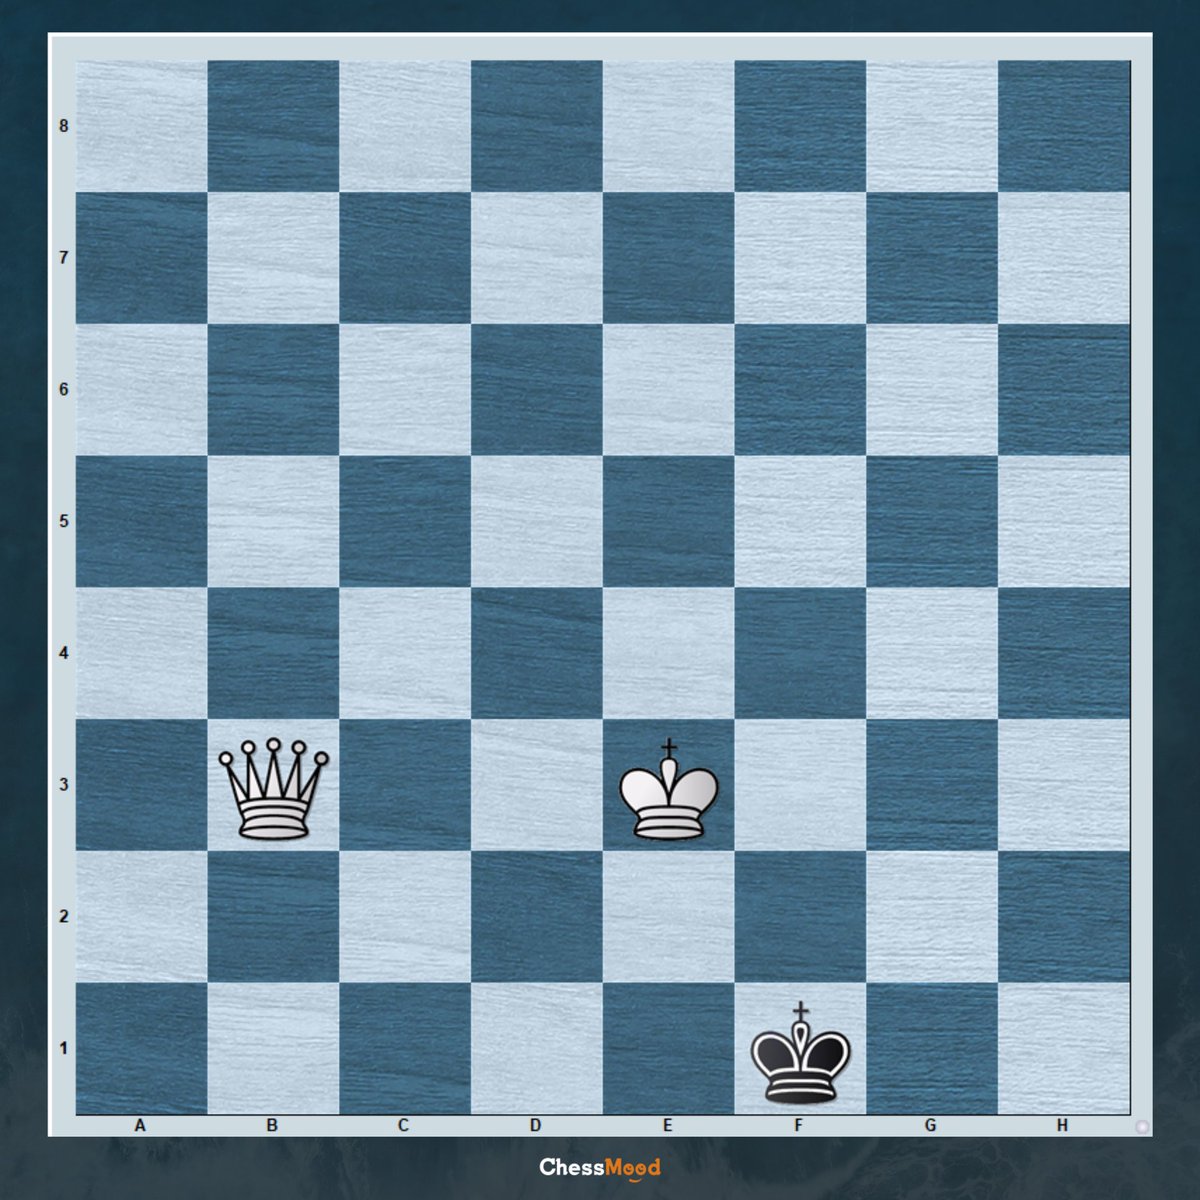 Mate in 2.
You have only 30 sec.
#chesspunks #chess